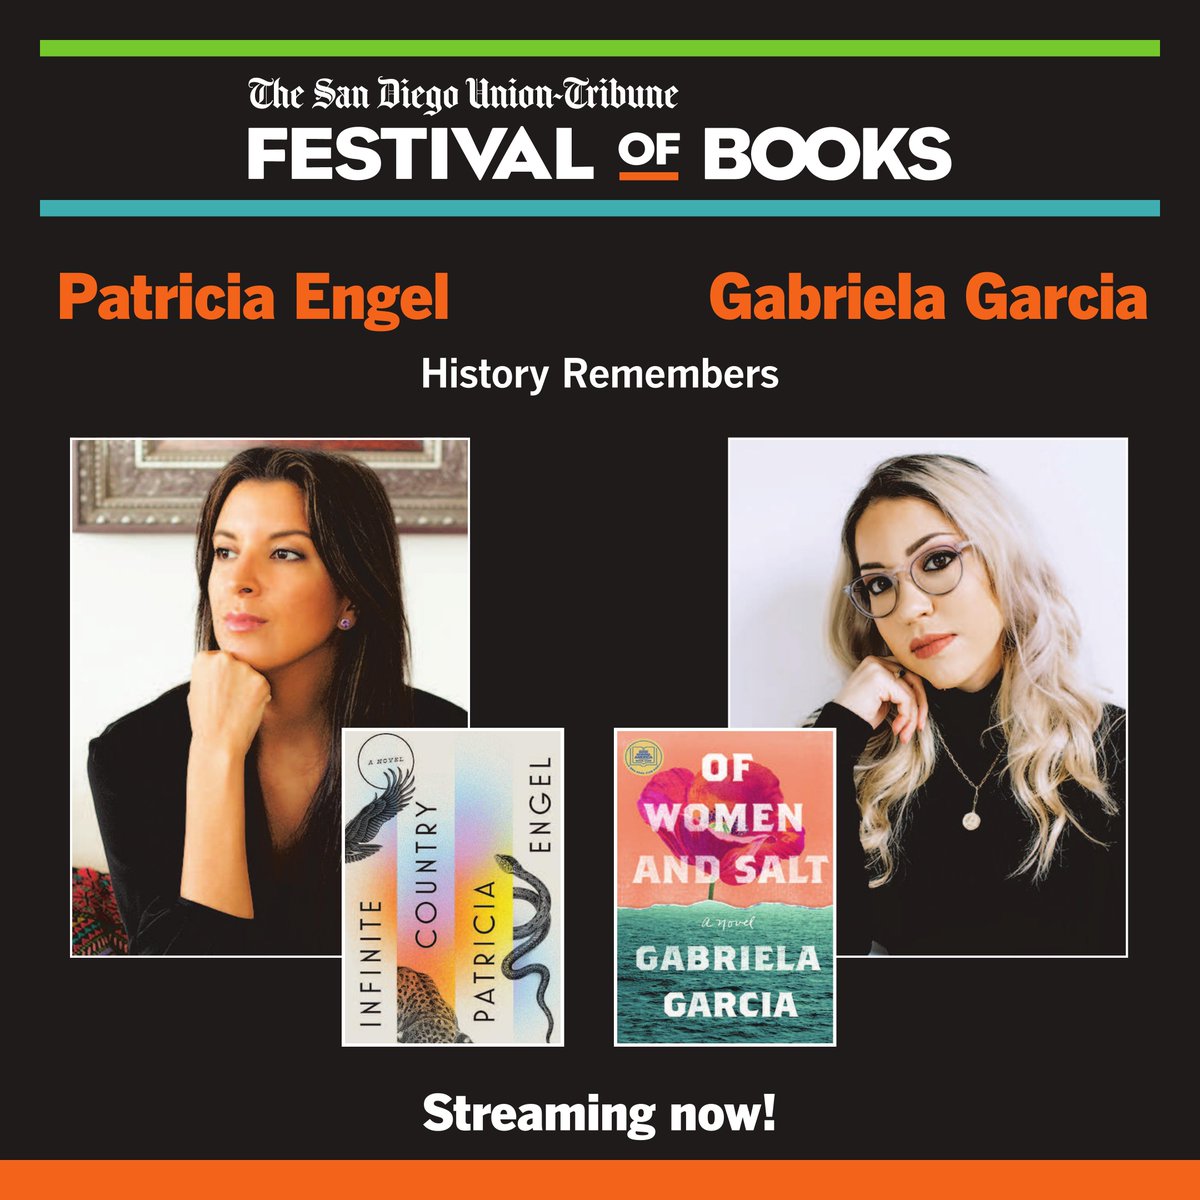 Celebrate and learn more about #HispanicHeritageMonth by watching the panel 'History Remembers' featuring Hispanic authors, Patricia Engel and Gabriela Garcia. Head to sdfestivalofbooks.com and easily search by author last name to explore the festival website! #GrabABook